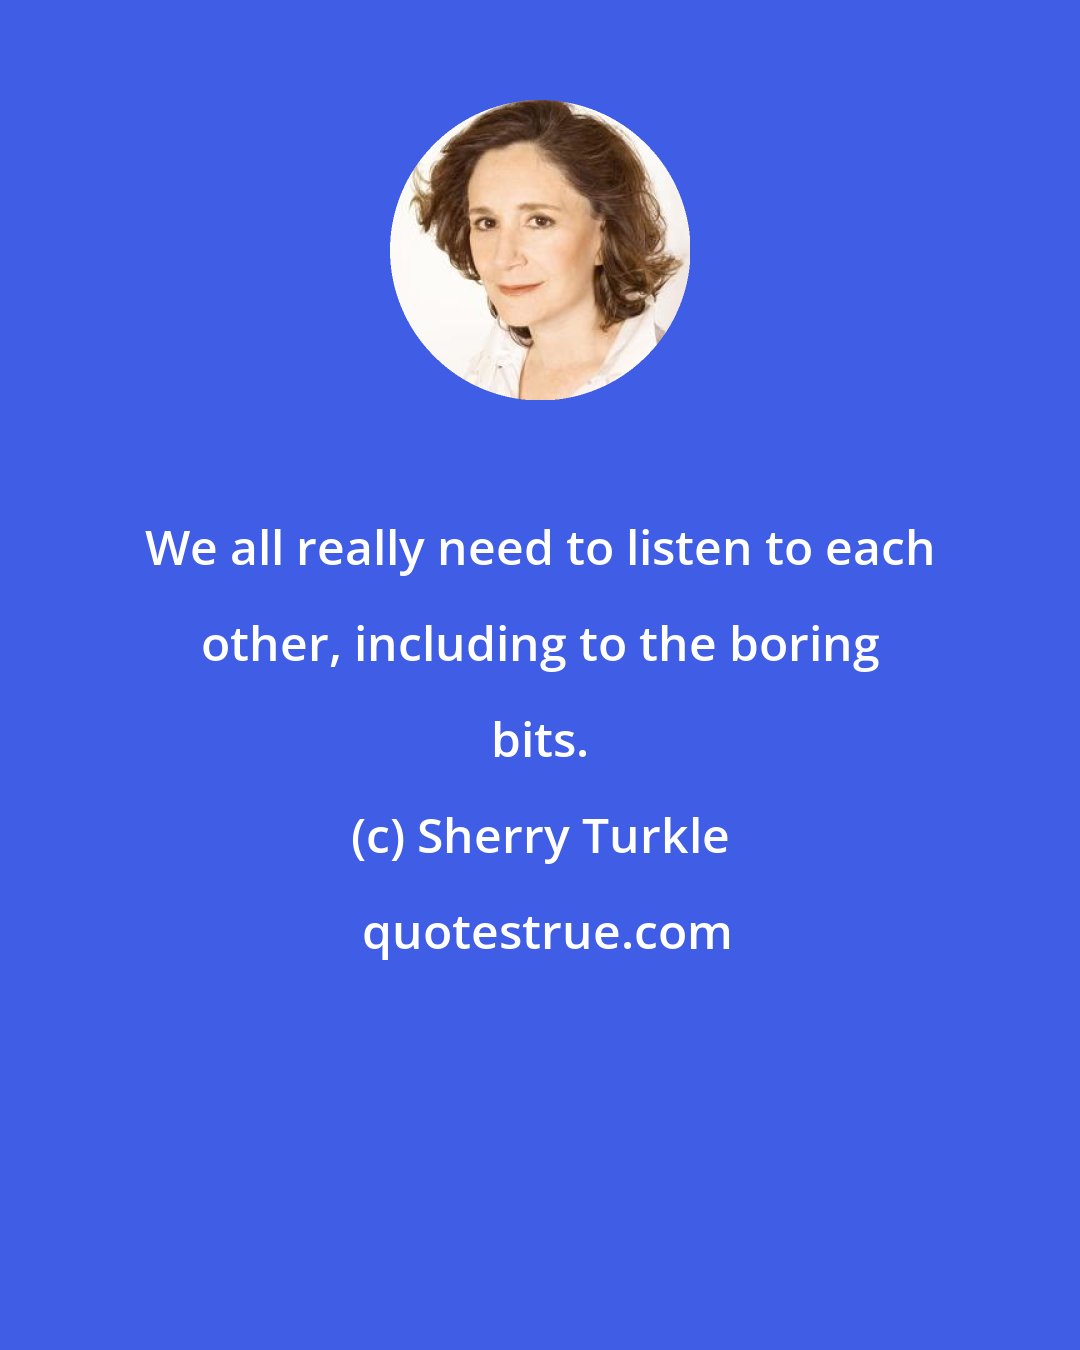 Sherry Turkle: We all really need to listen to each other, including to the boring bits.